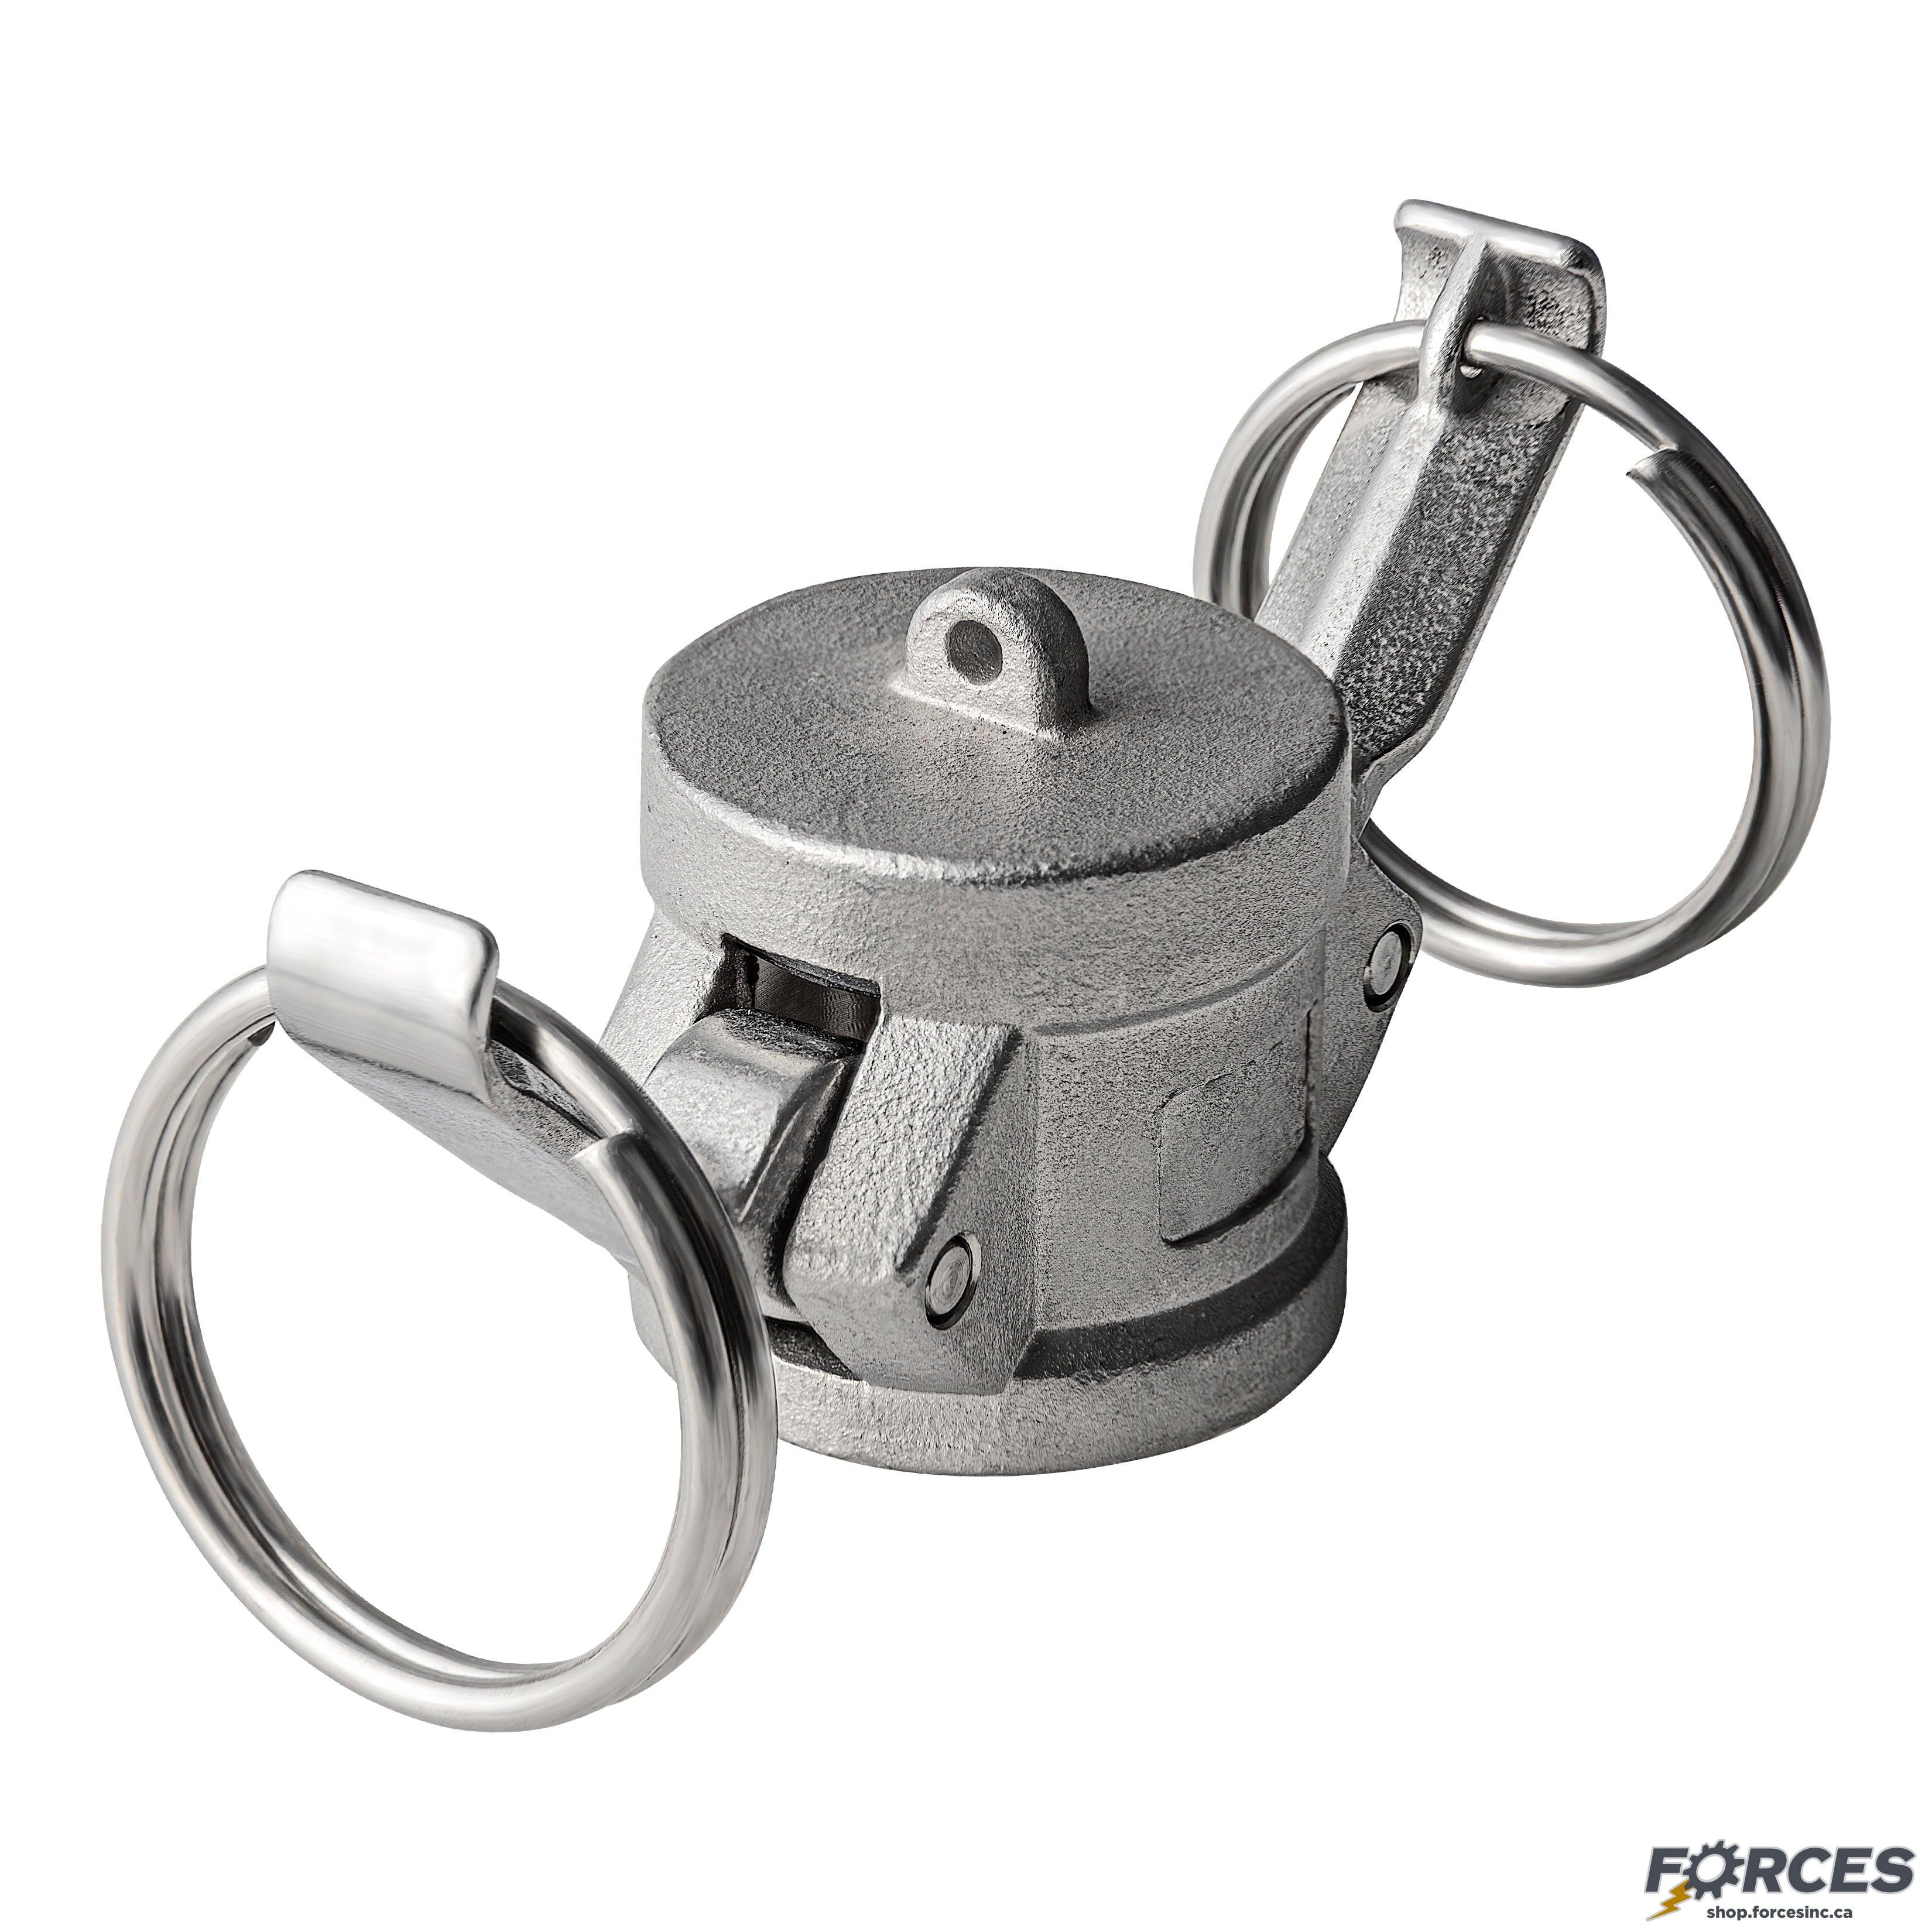 6" Type DC Camlock Fitting Stainless Steel 316 - Forces Inc